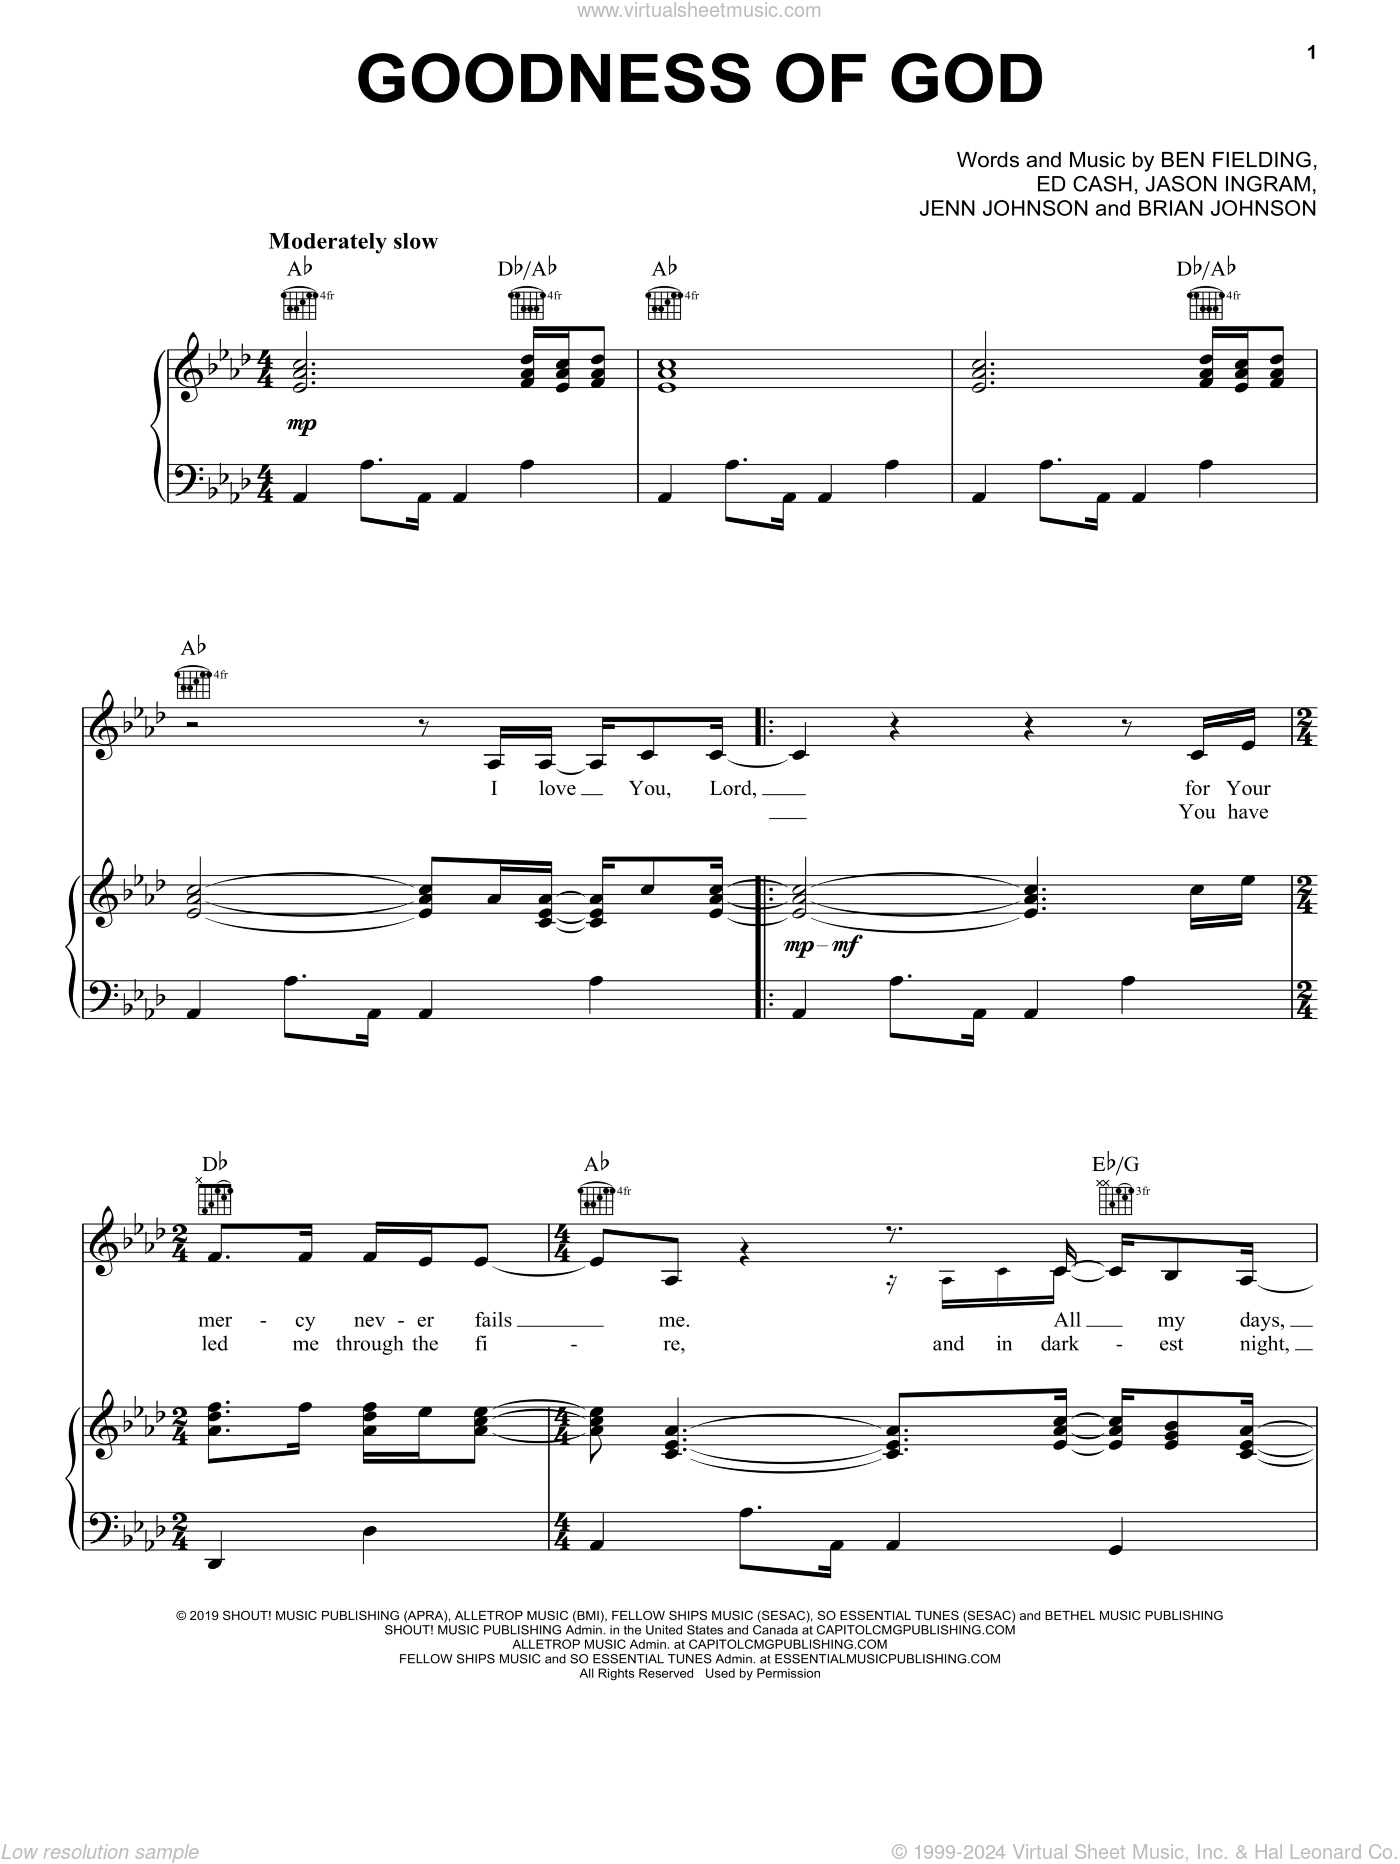 Johnson - Goodness Of God sheet music for voice, piano or guitar